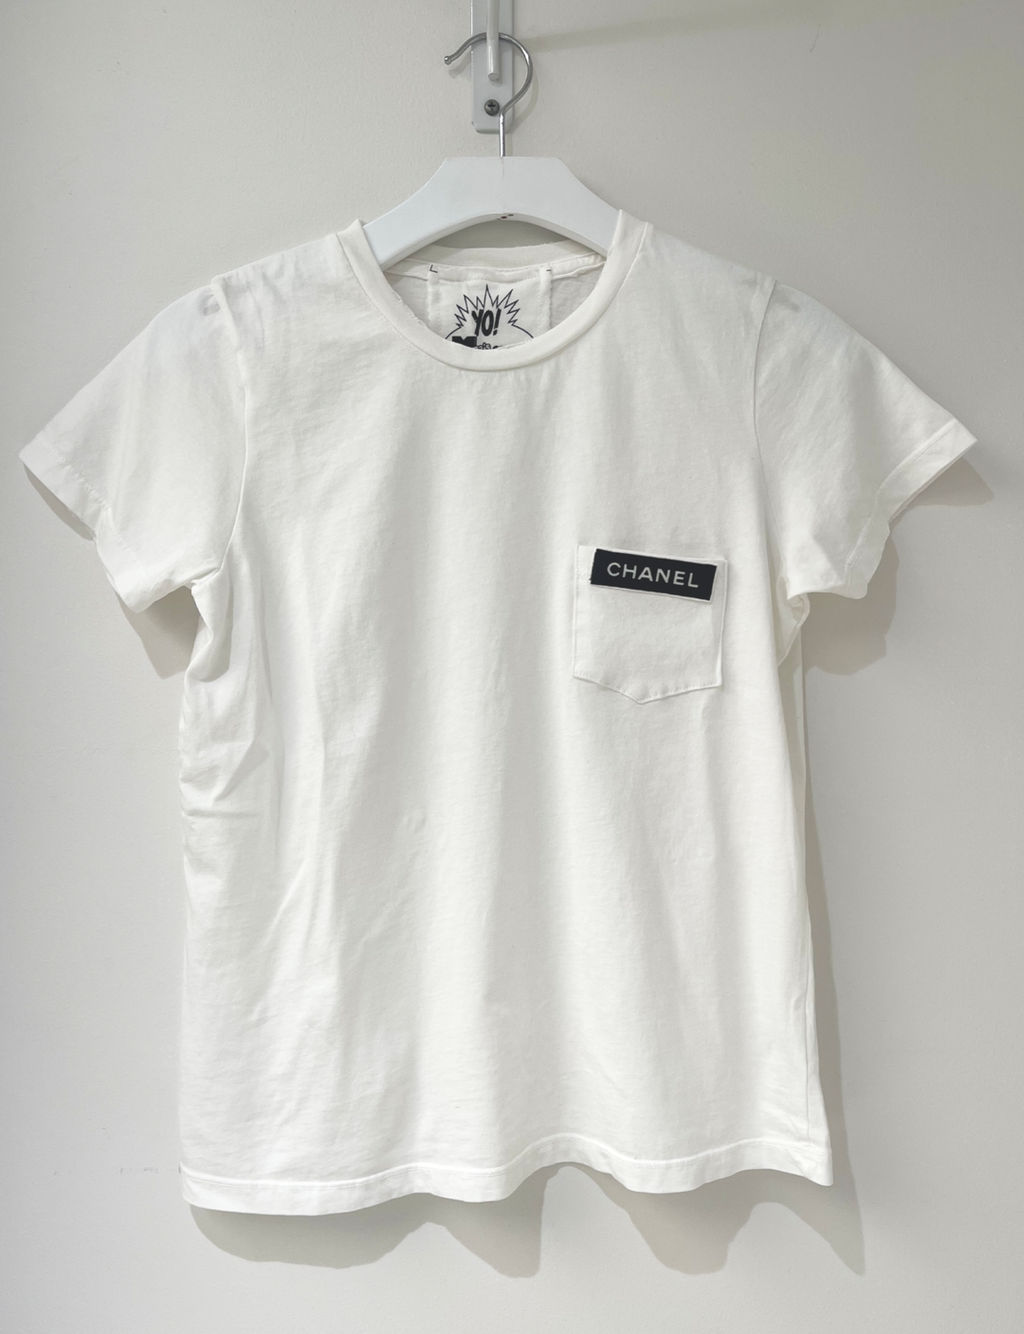 Chanel Patch Pocket Womens Tee, White/Black